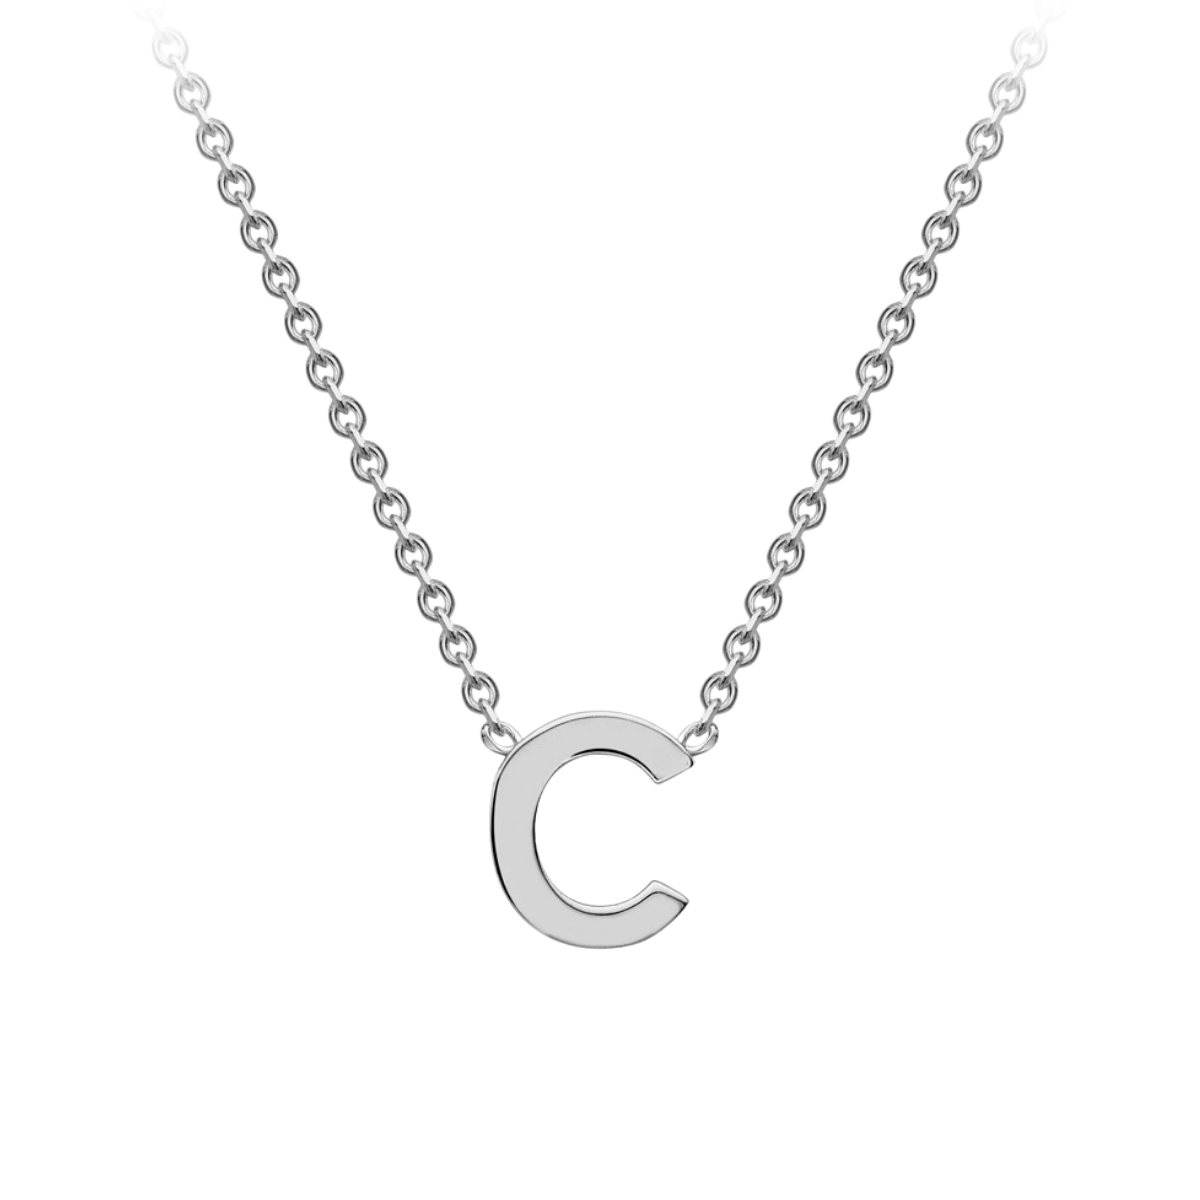 Buy Marie C Necklace In 925 Silver from Shaya by CaratLane